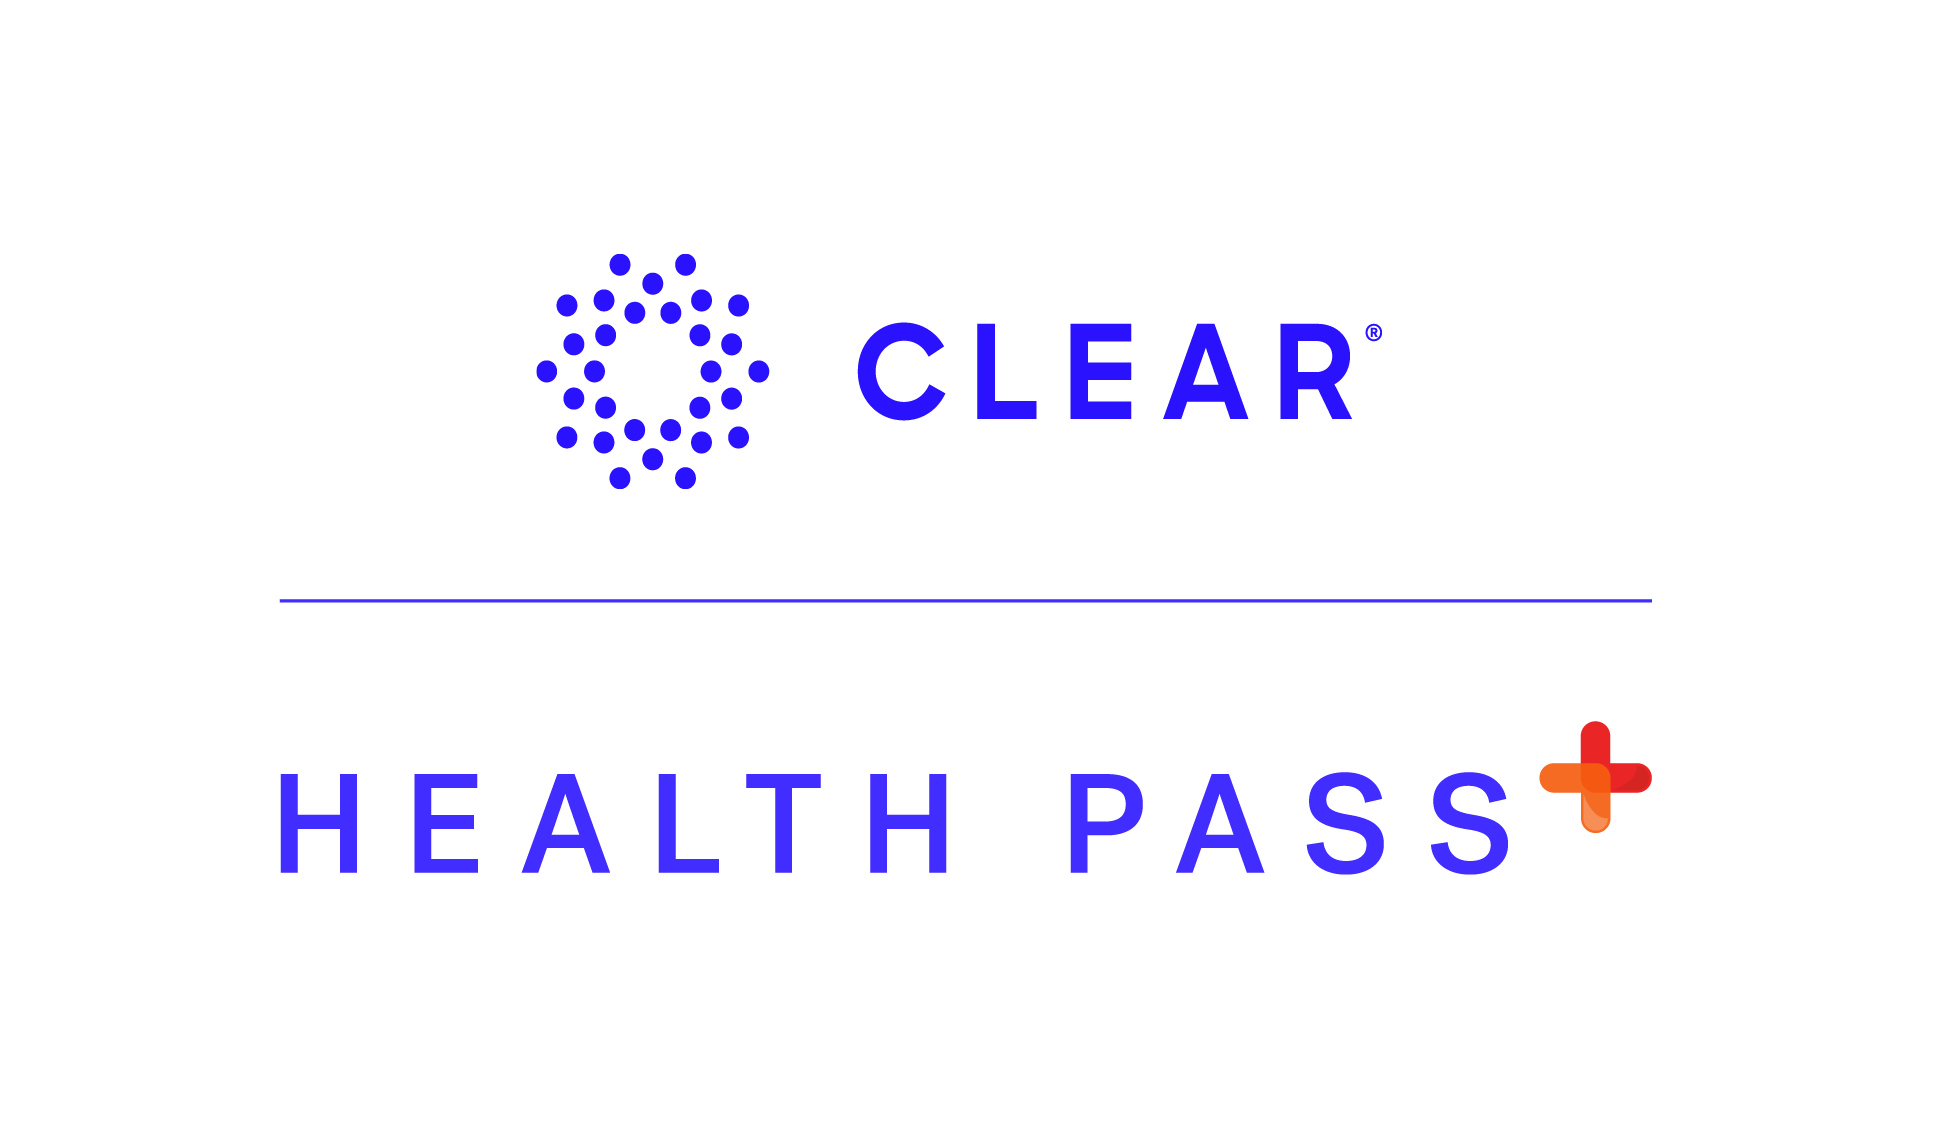 Health Pass CLEAR